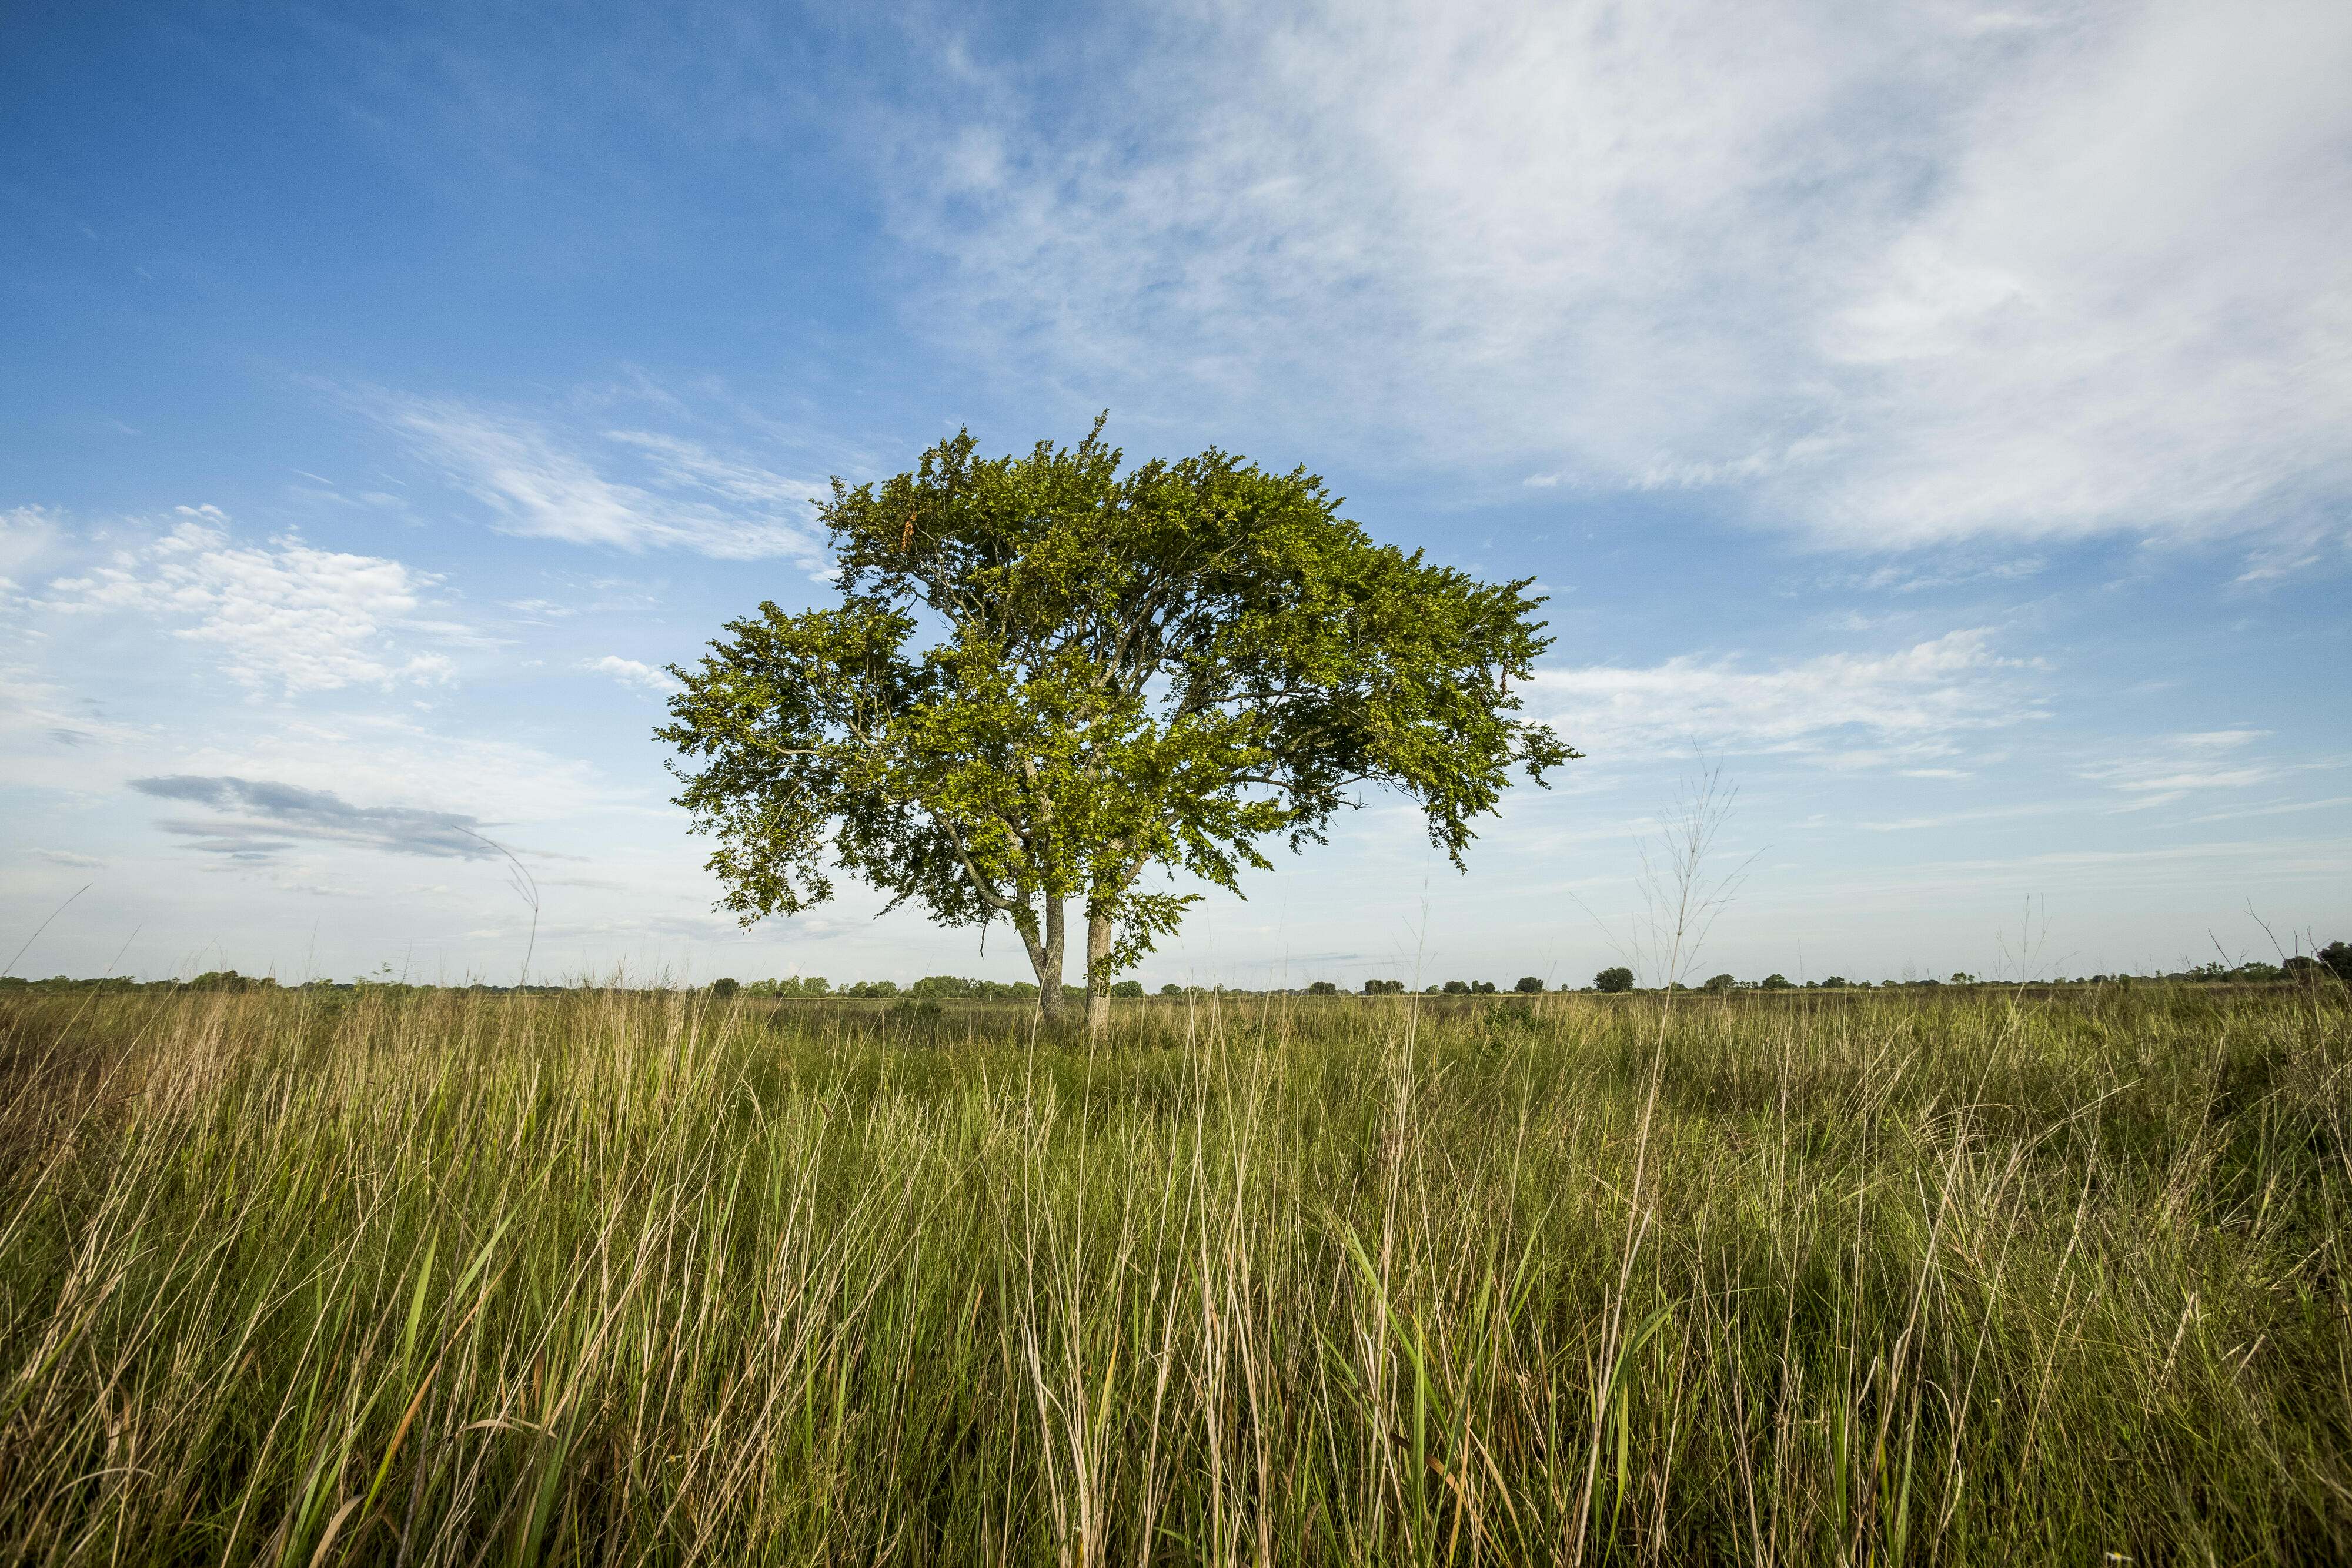 A lone tree grows in the middle of a grassy field.